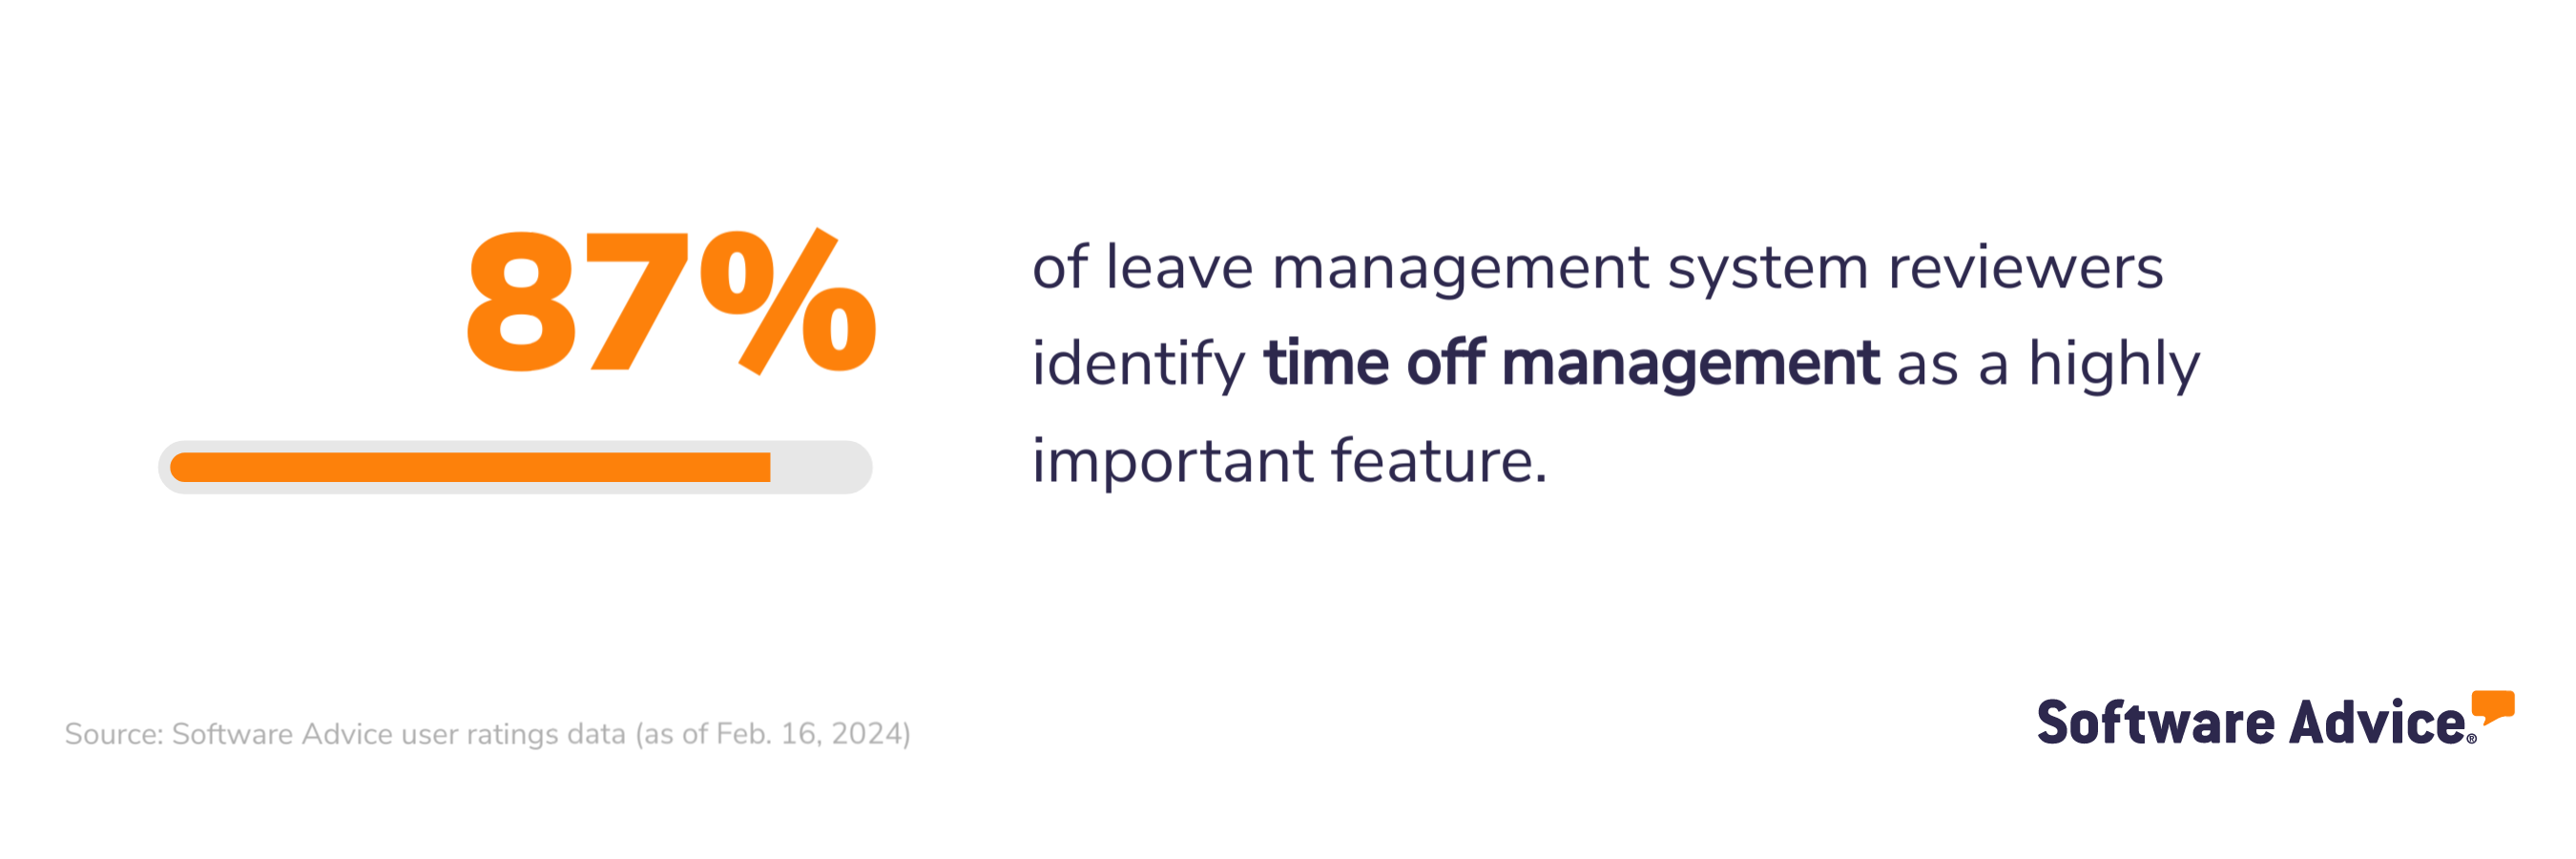 87% of leave management system reviewers identify time off management as a highly important feature.